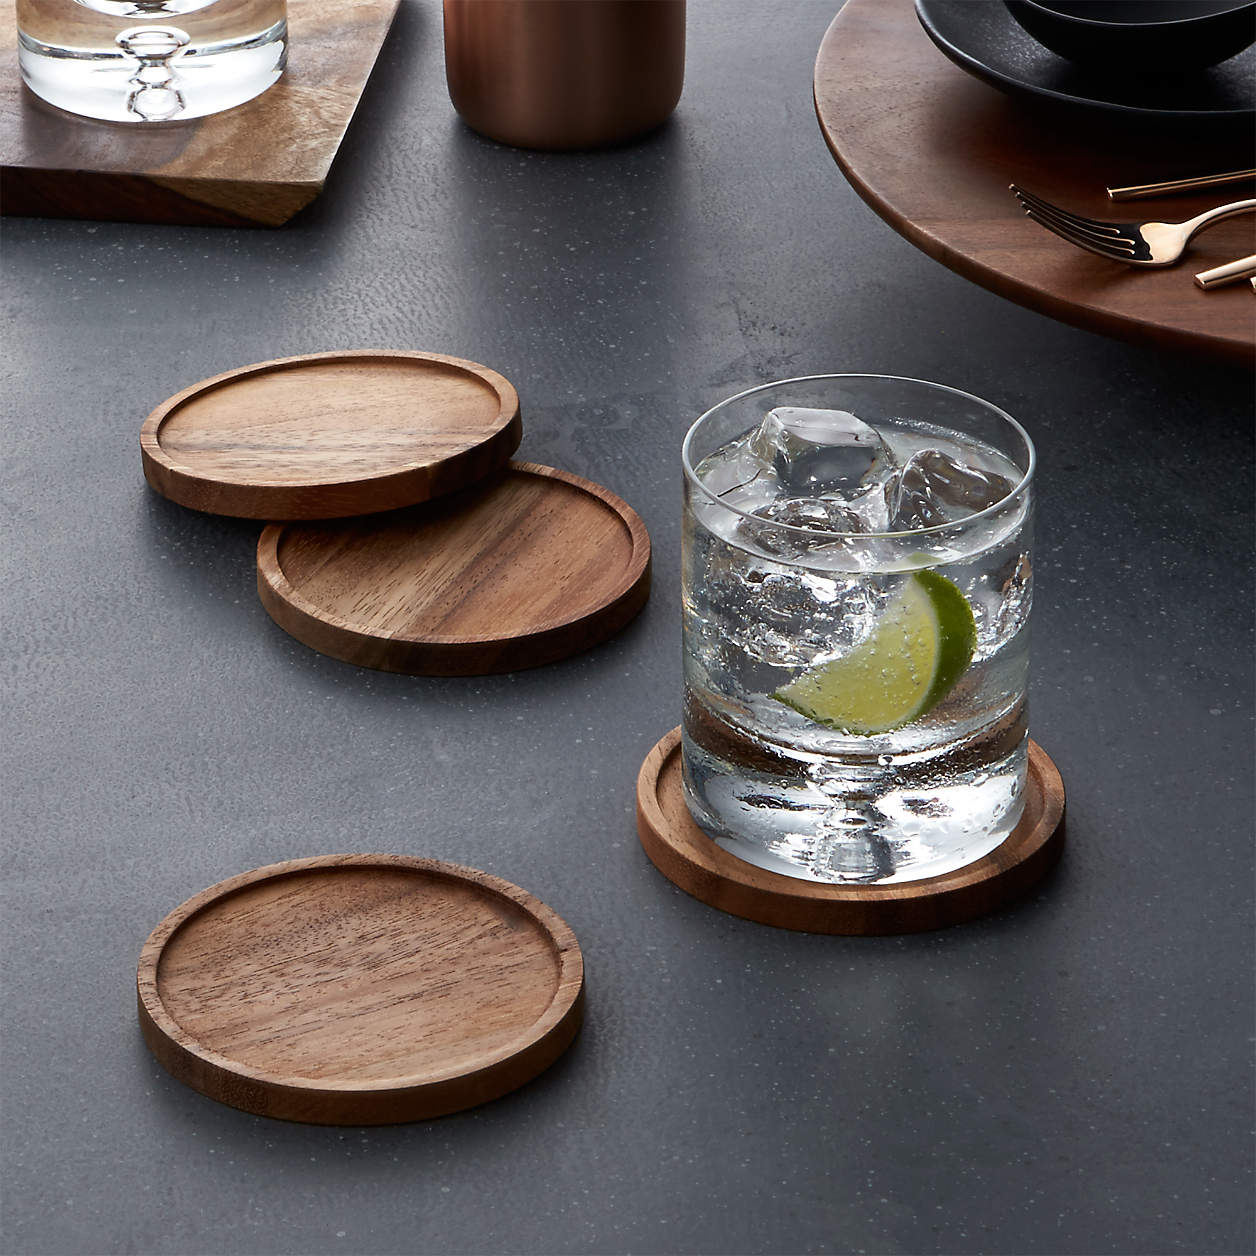 Round Slate Stone Rustic Beverage Drink Table Coasters Set with Acacia Wood Holder 4 Coasters